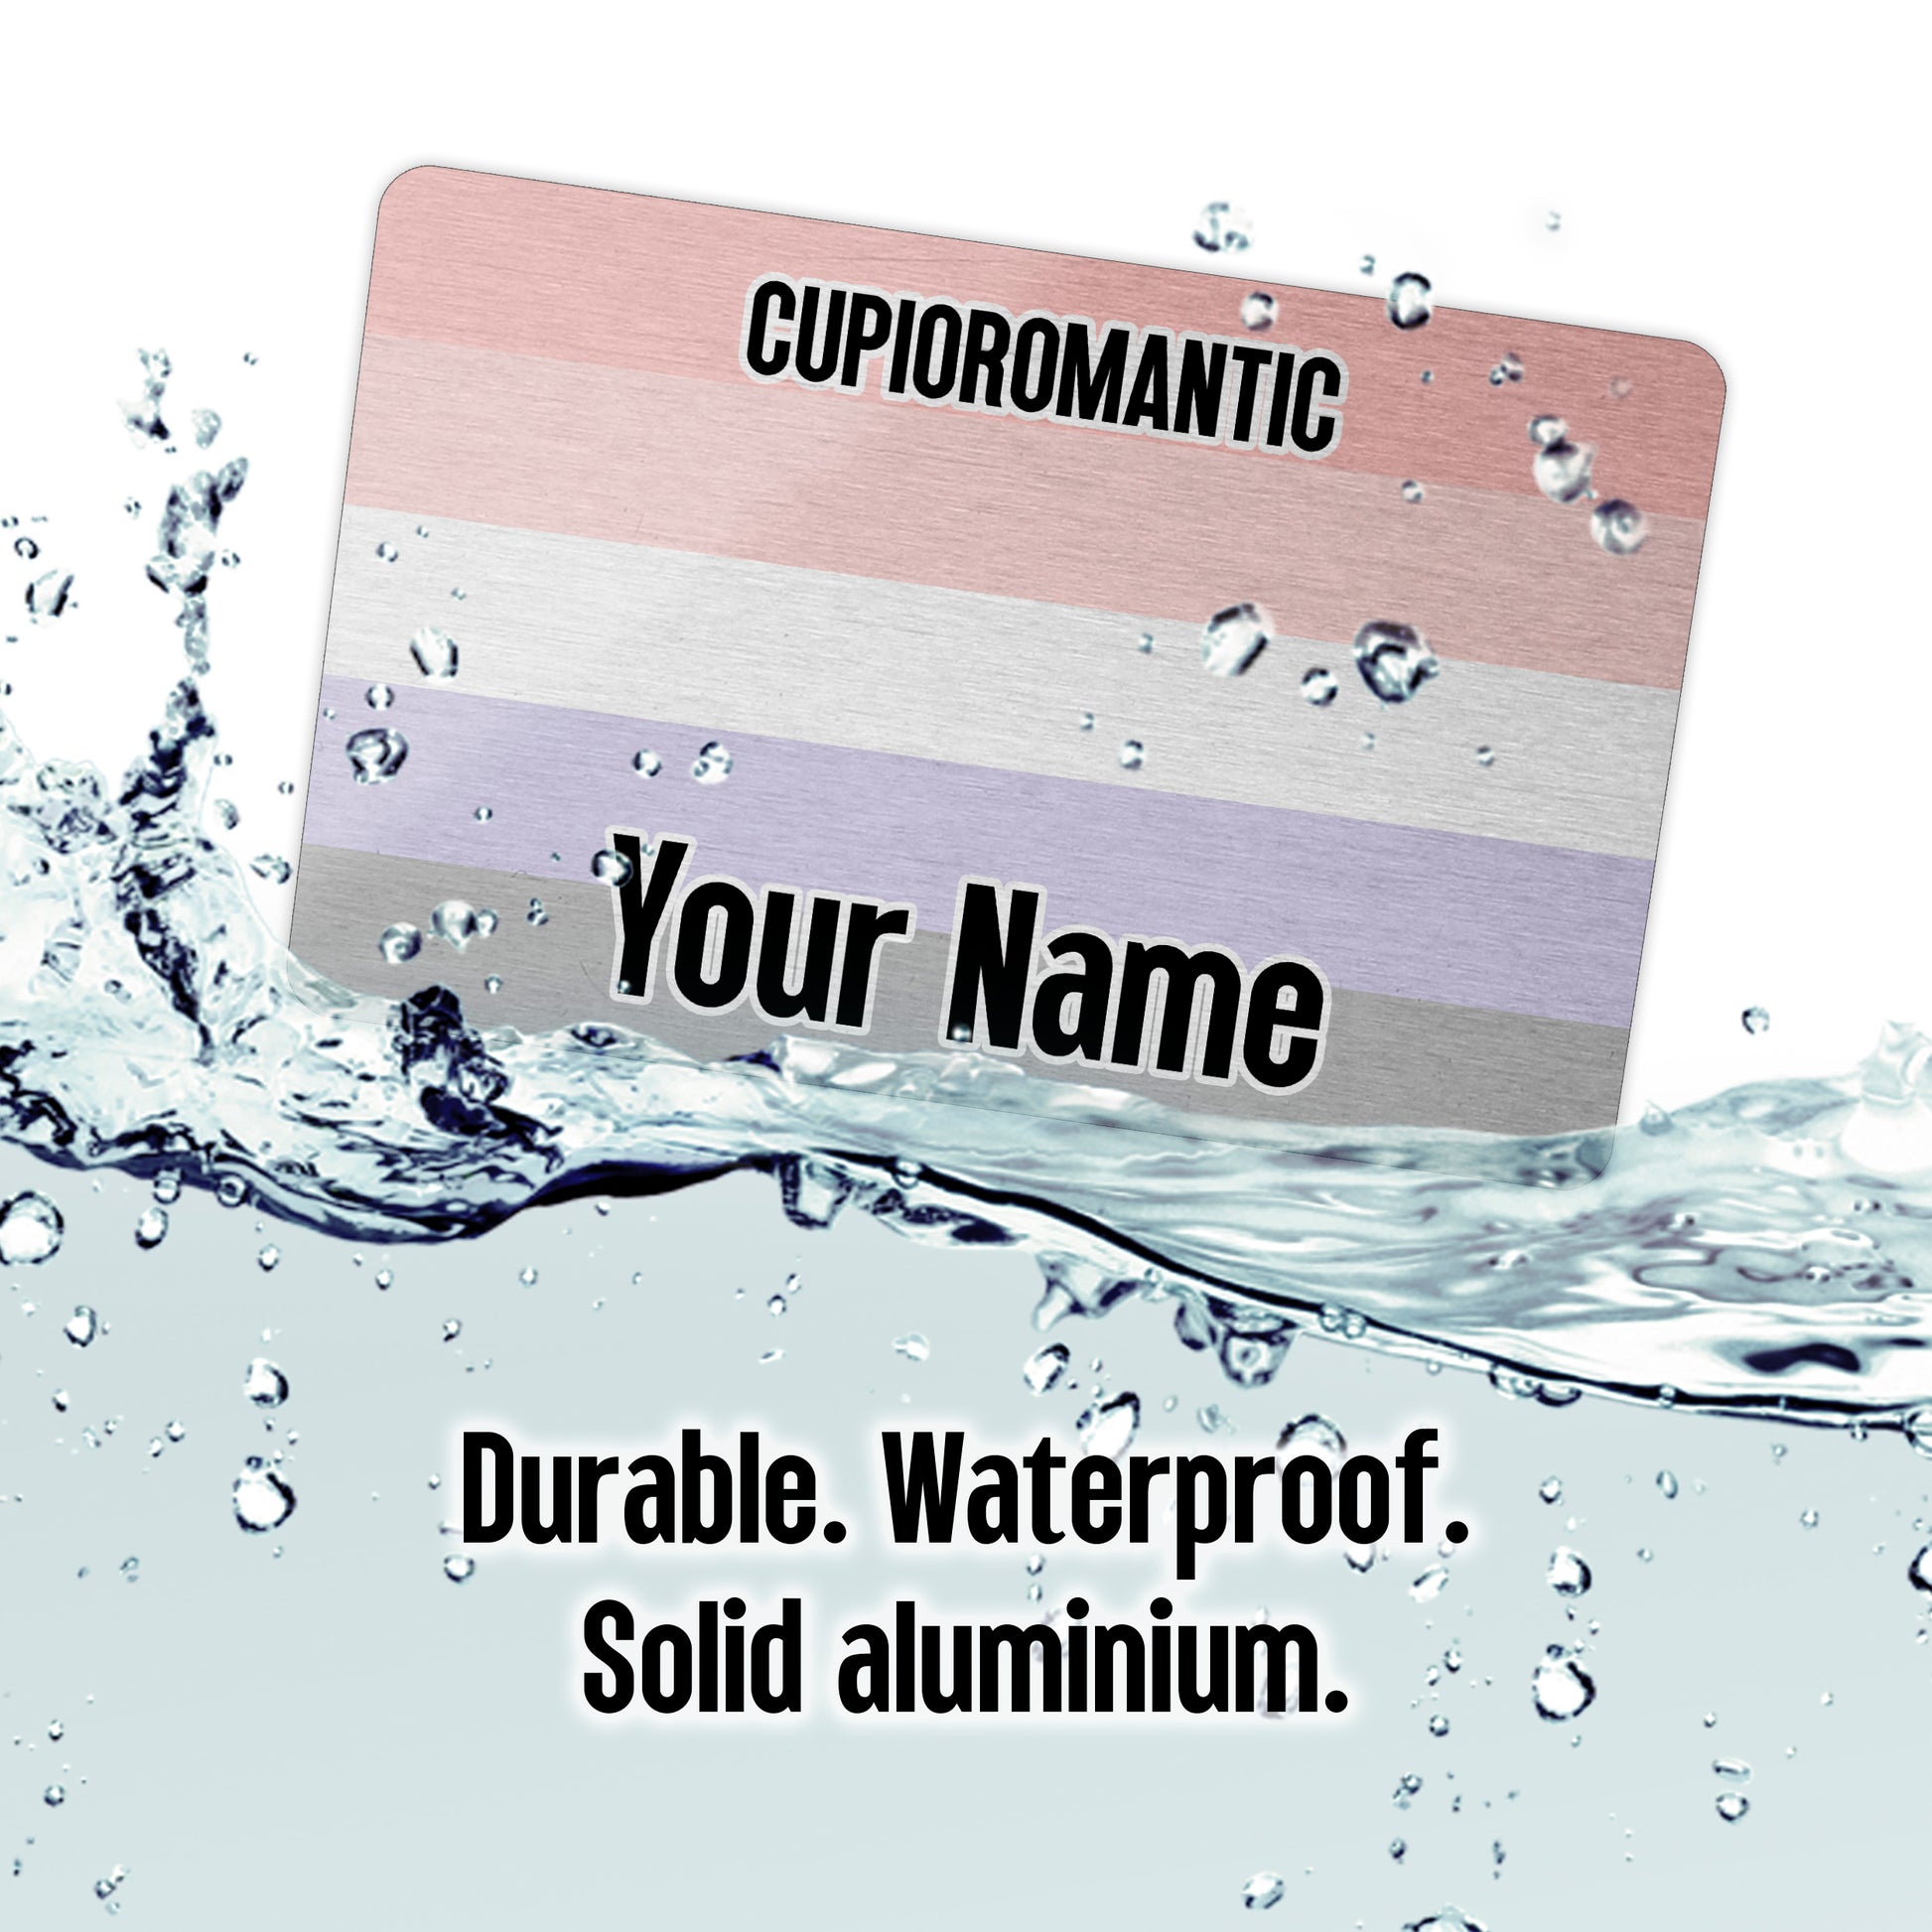 Aluminium wallet card personalised with your name and the cupioromantic pride flag